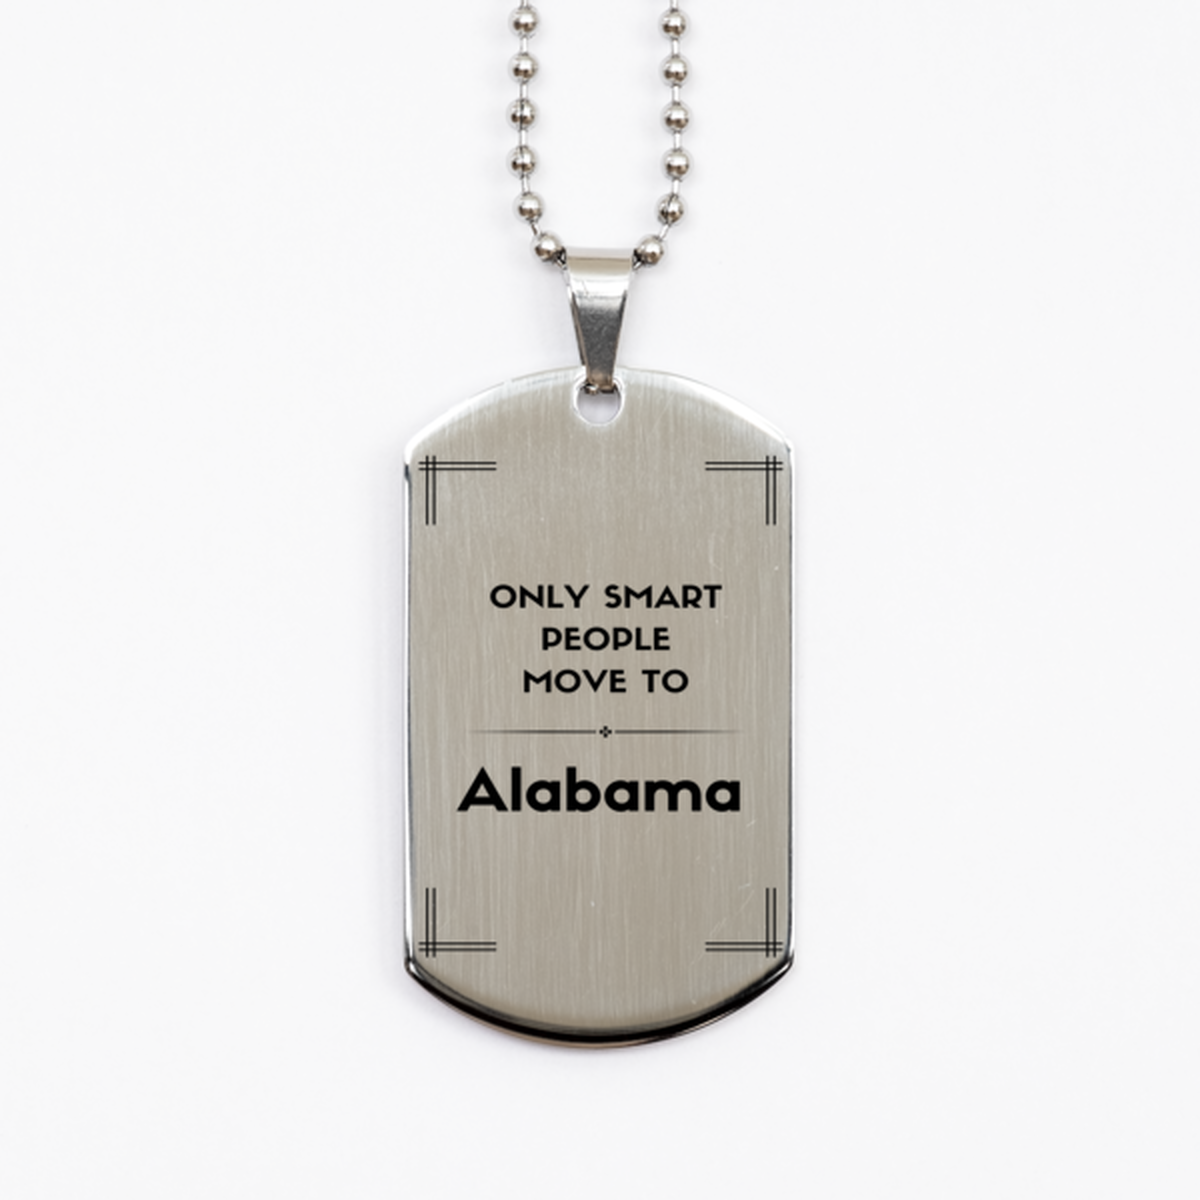 Only smart people move to Alabama Silver Dog Tag, Gag Gifts For Alabama, Move to Alabama Gifts for Friends Coworker Funny Saying Quote